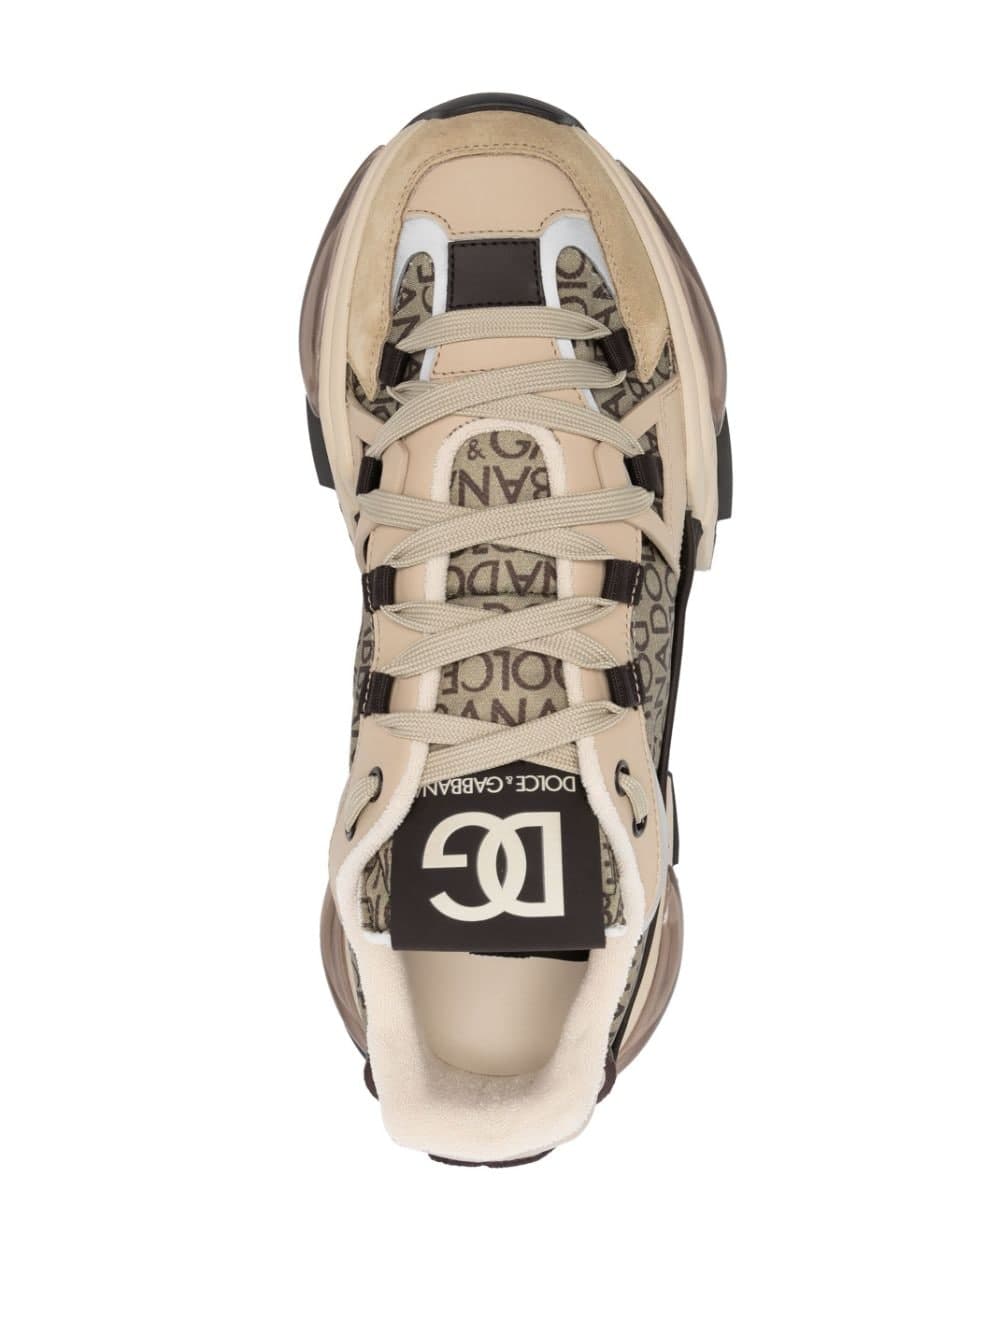 Dolce & Gabbana, Airmaster Panelled Low Top Sneakers